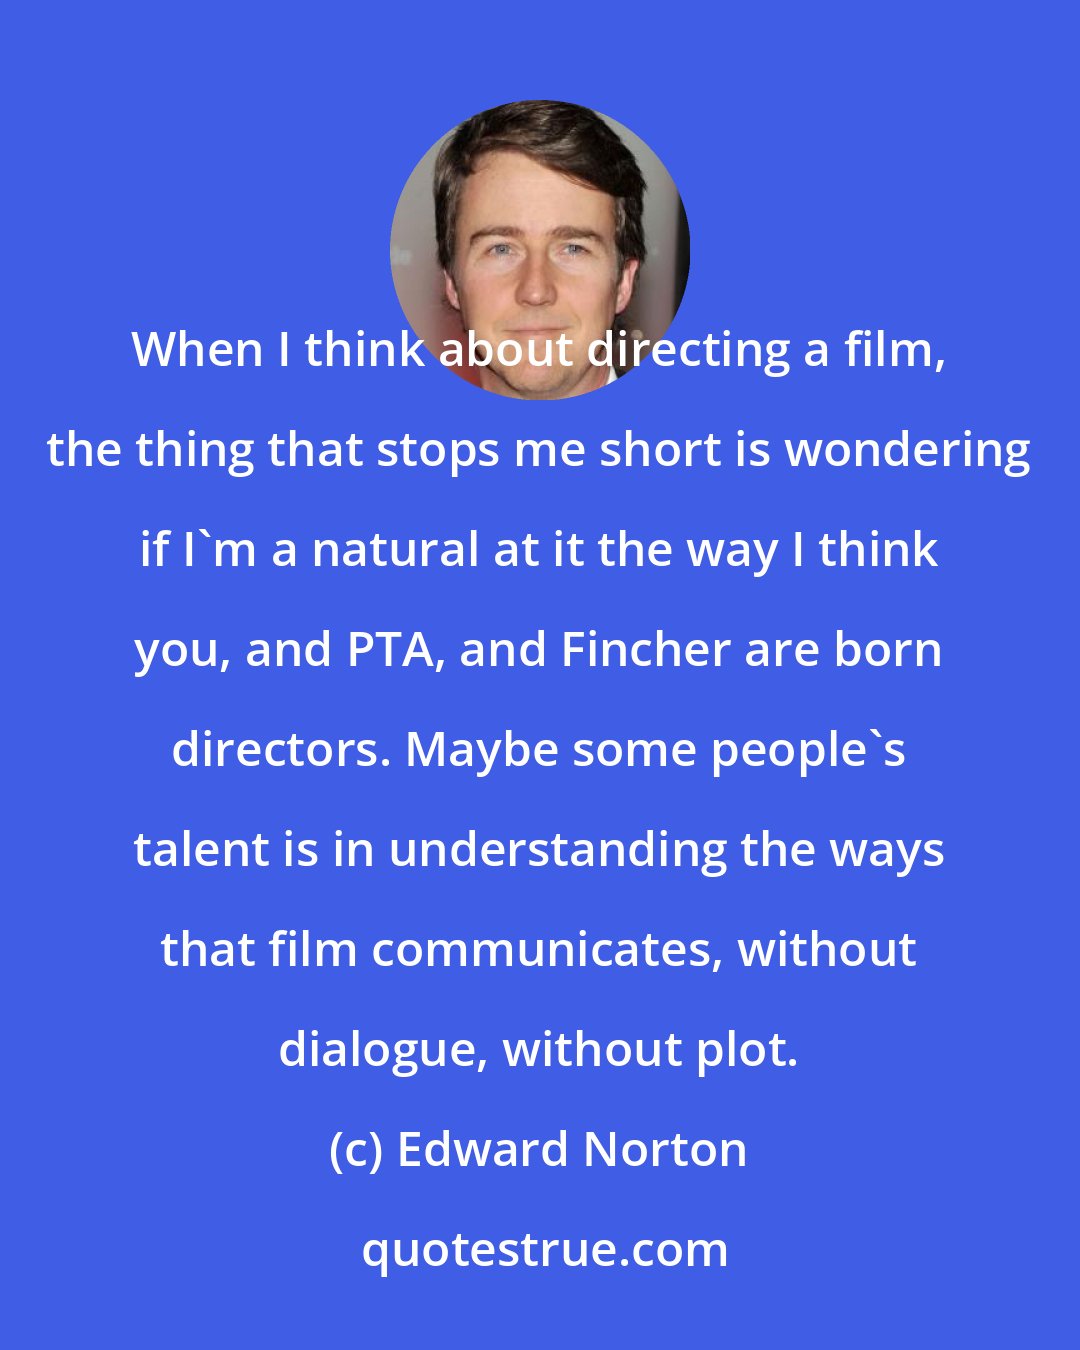 Edward Norton: When I think about directing a film, the thing that stops me short is wondering if I'm a natural at it the way I think you, and PTA, and Fincher are born directors. Maybe some people's talent is in understanding the ways that film communicates, without dialogue, without plot.